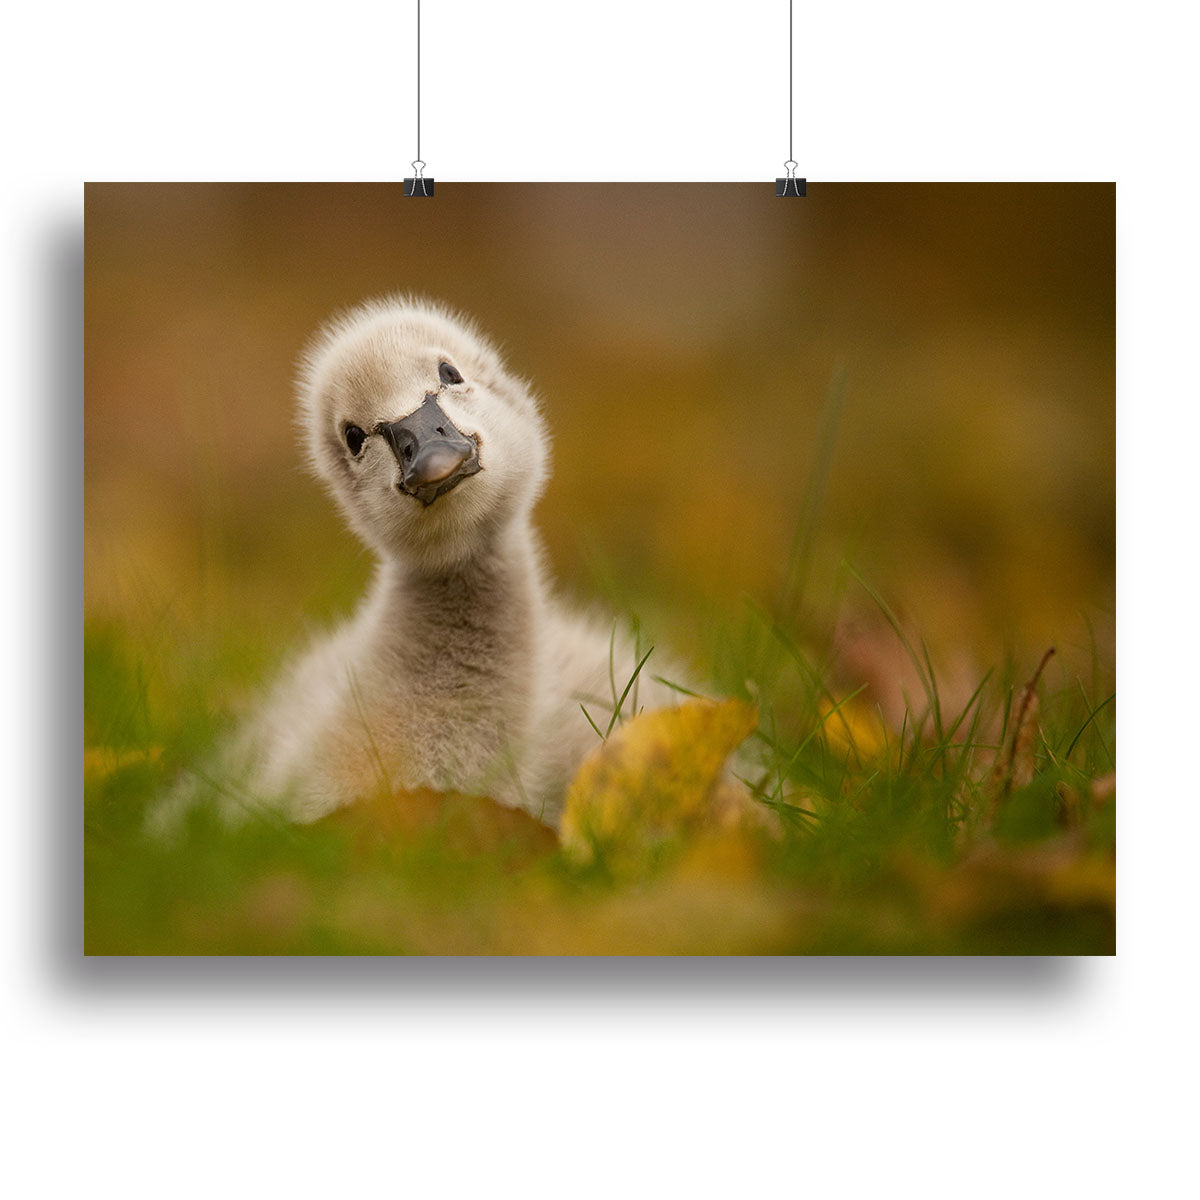 Black Swan Baby Canvas Print or Poster - 1x - 2